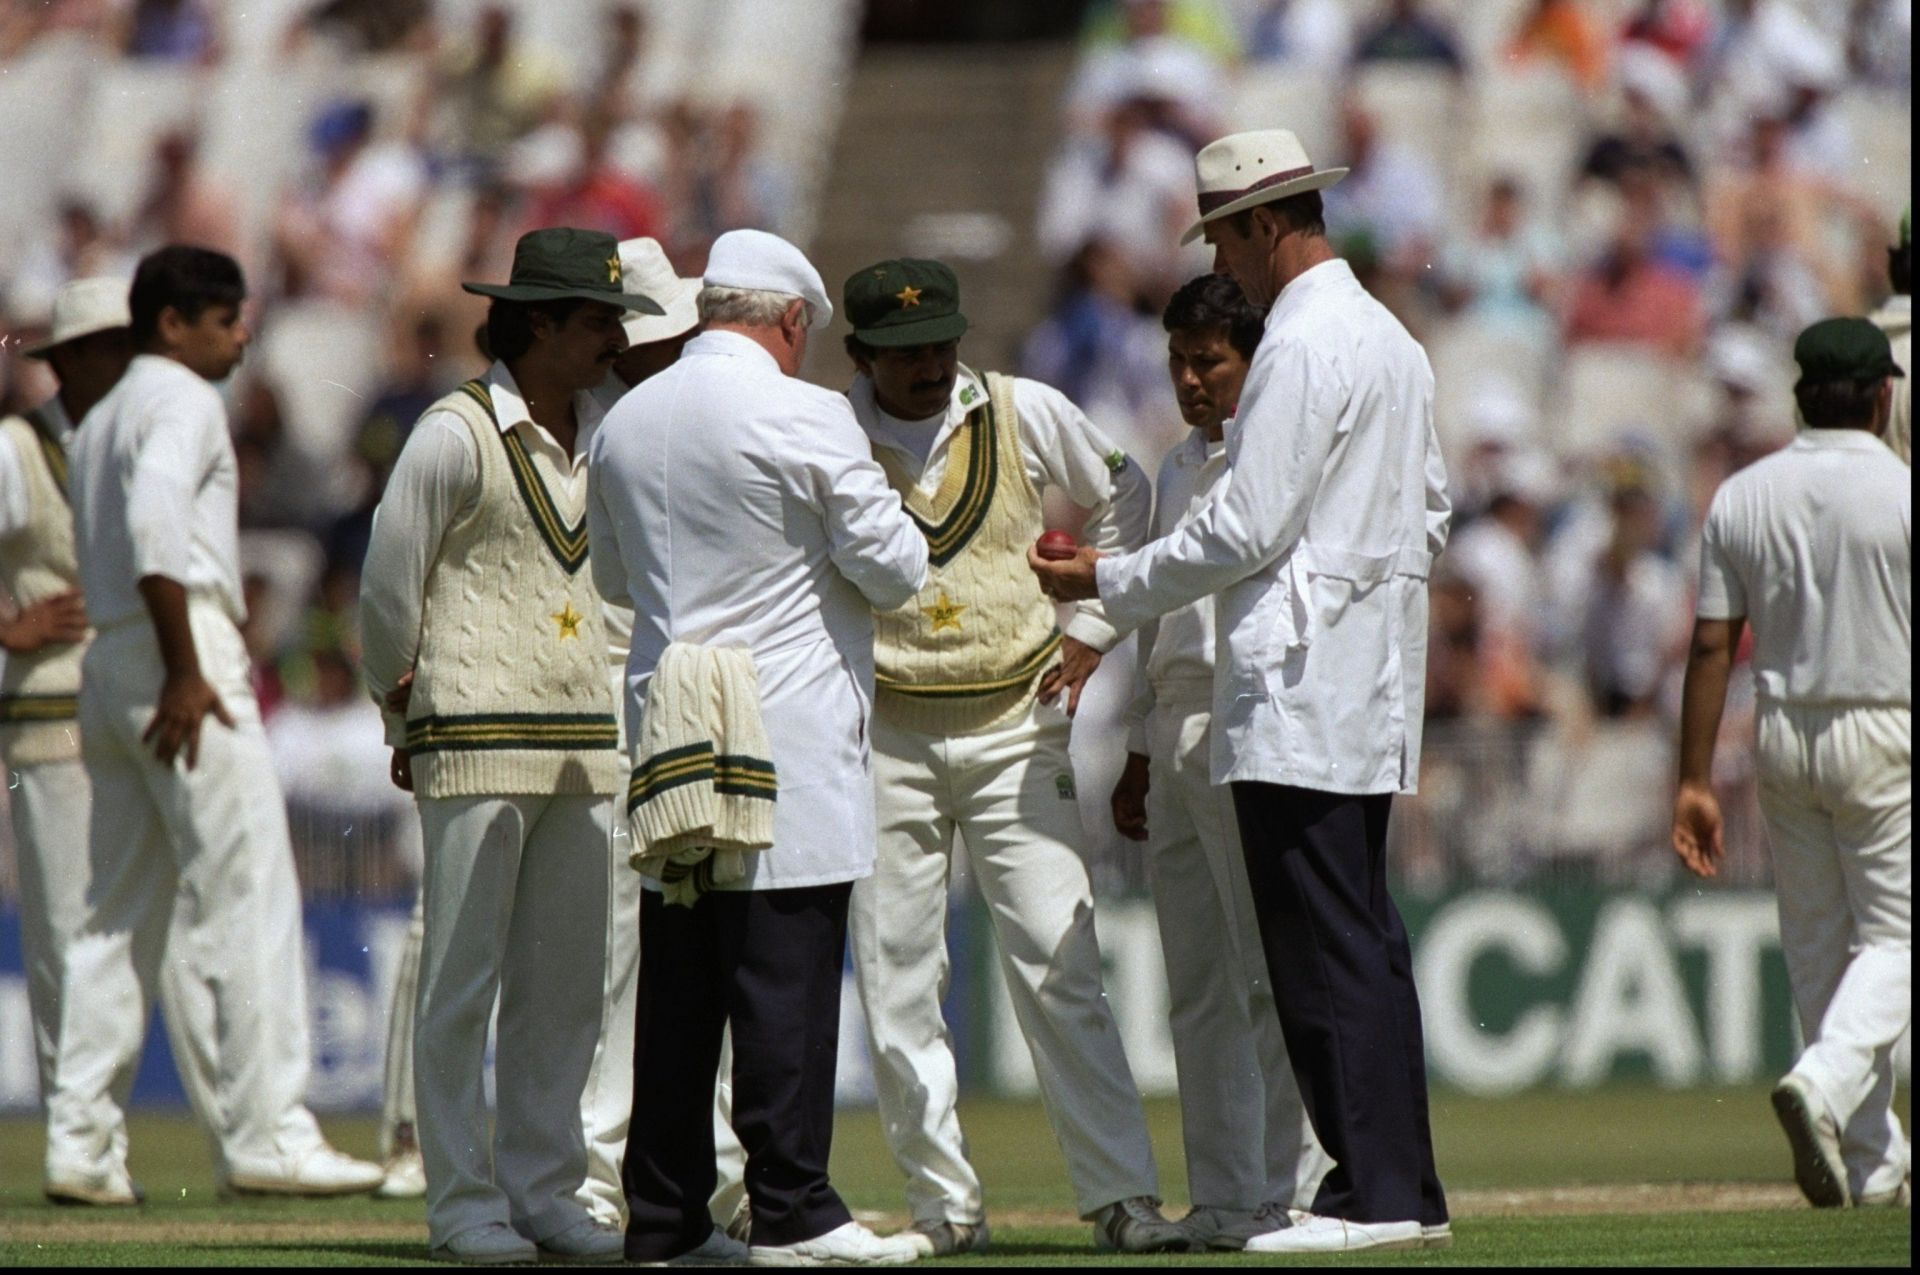 The umpires and the Pakistan team discuss the condition of the ball during the third Test against England at Old Trafford in 1992. Pic: Getty Images